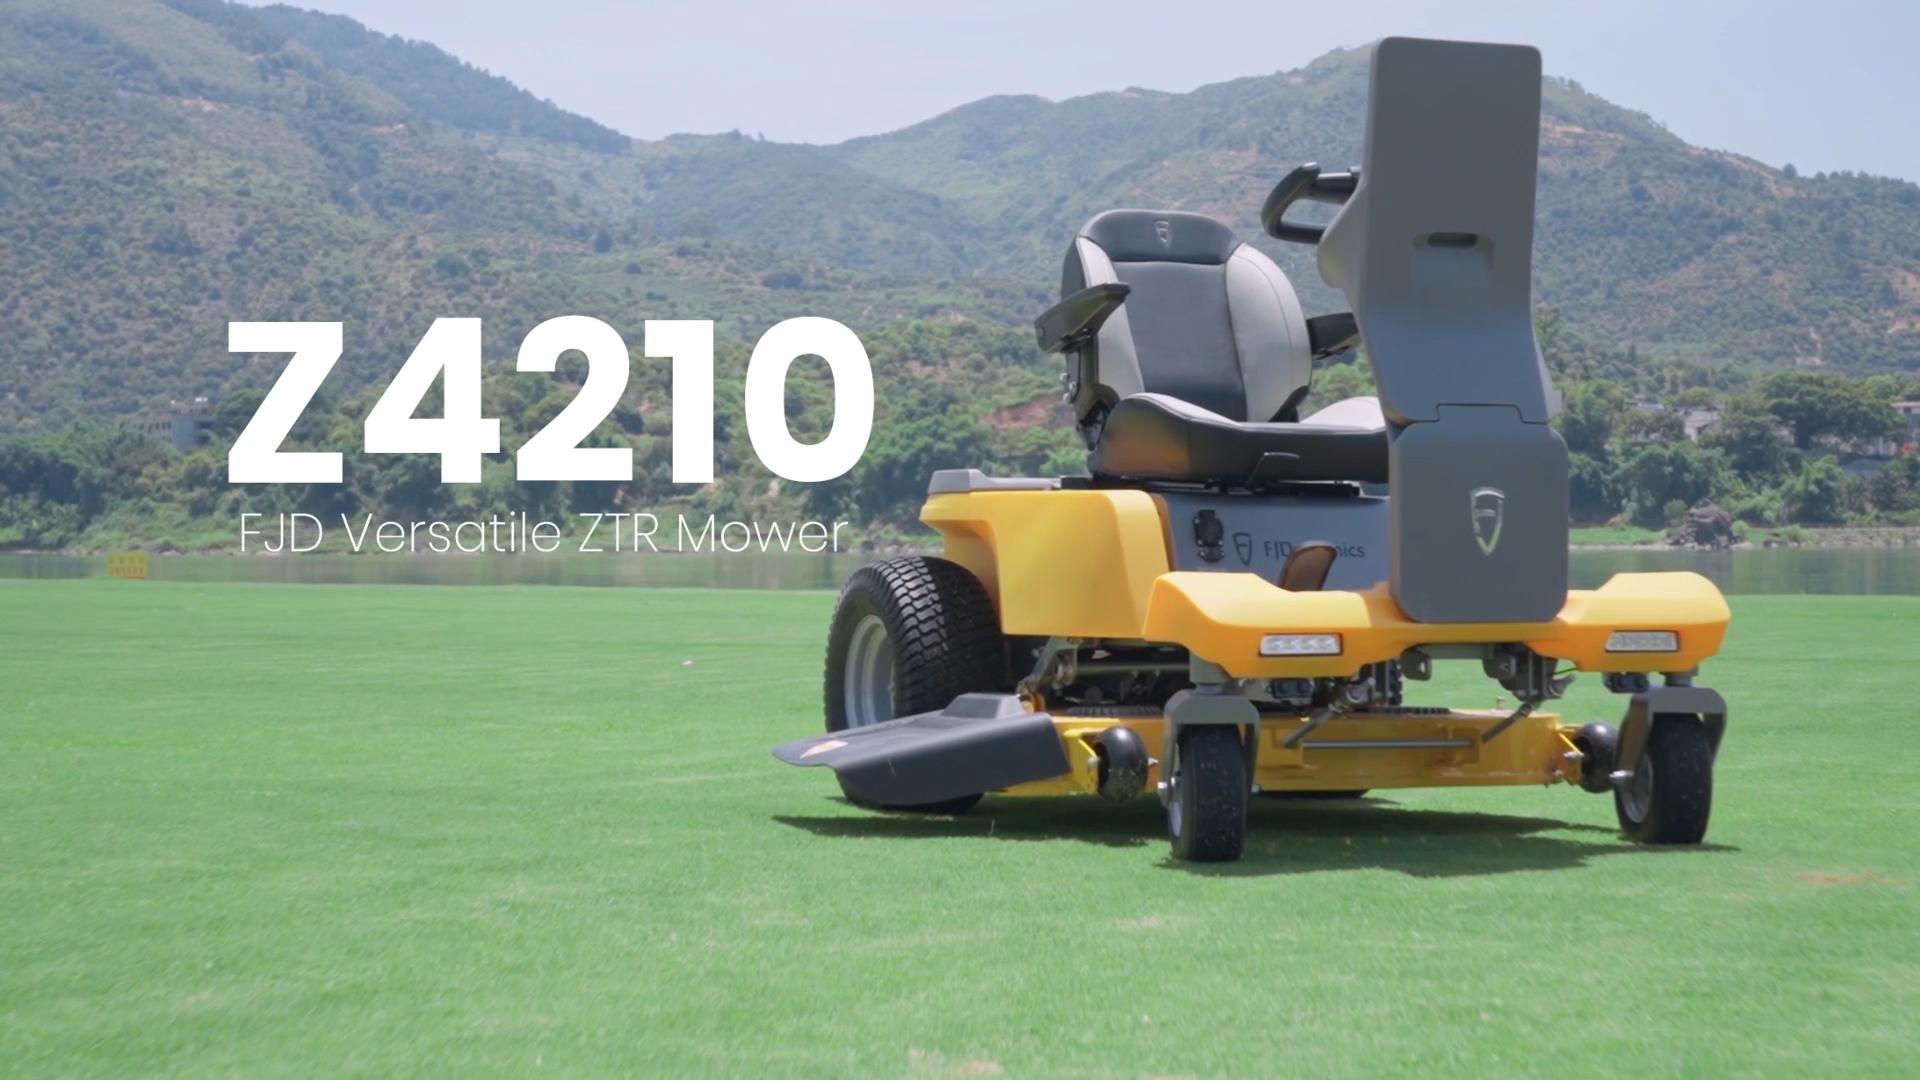 Load video: FJD Smart Versatile ZTR Mower video: An electric-powered lawn mower with smart driving and mobile power station functionalities. Maintain your garden all-year-round with our accessories, mowing, grass vacuuming or snow plowing capabilities.